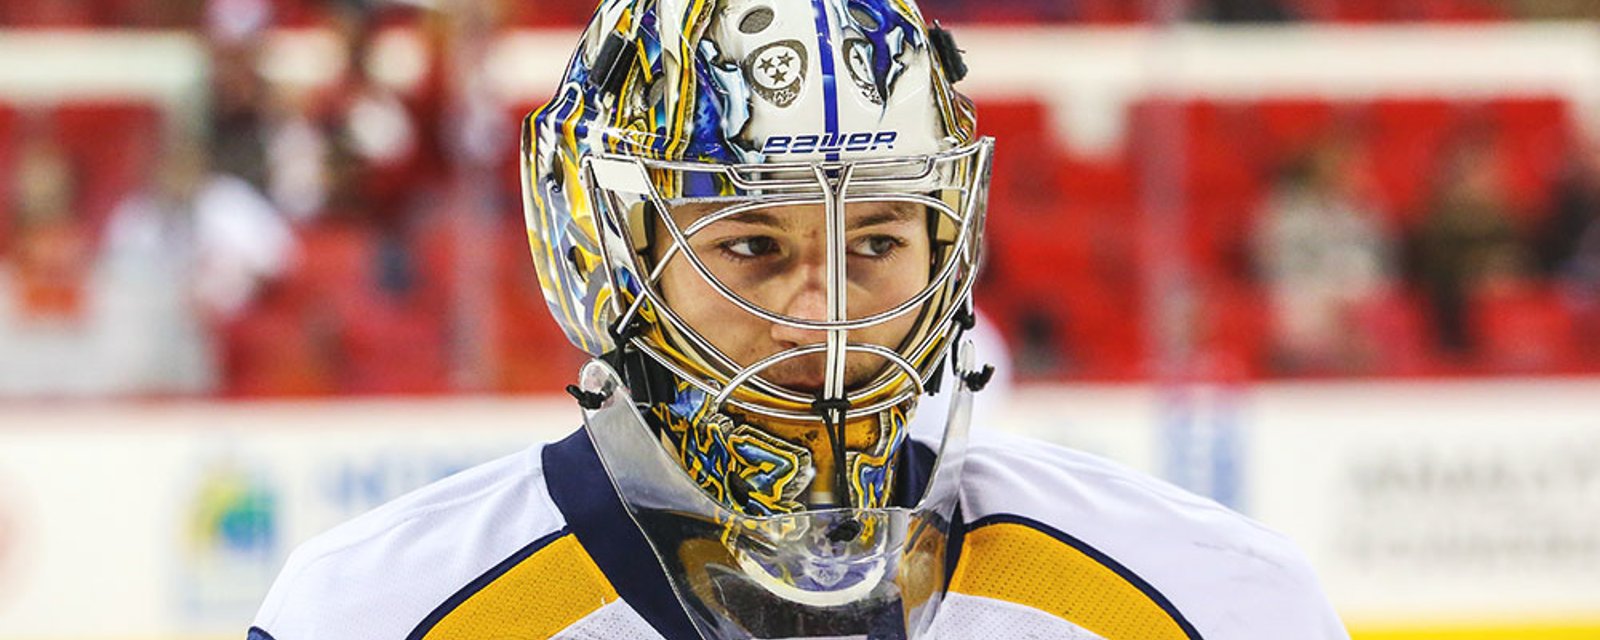 Preds goalie turns his back on team, signs in KHL